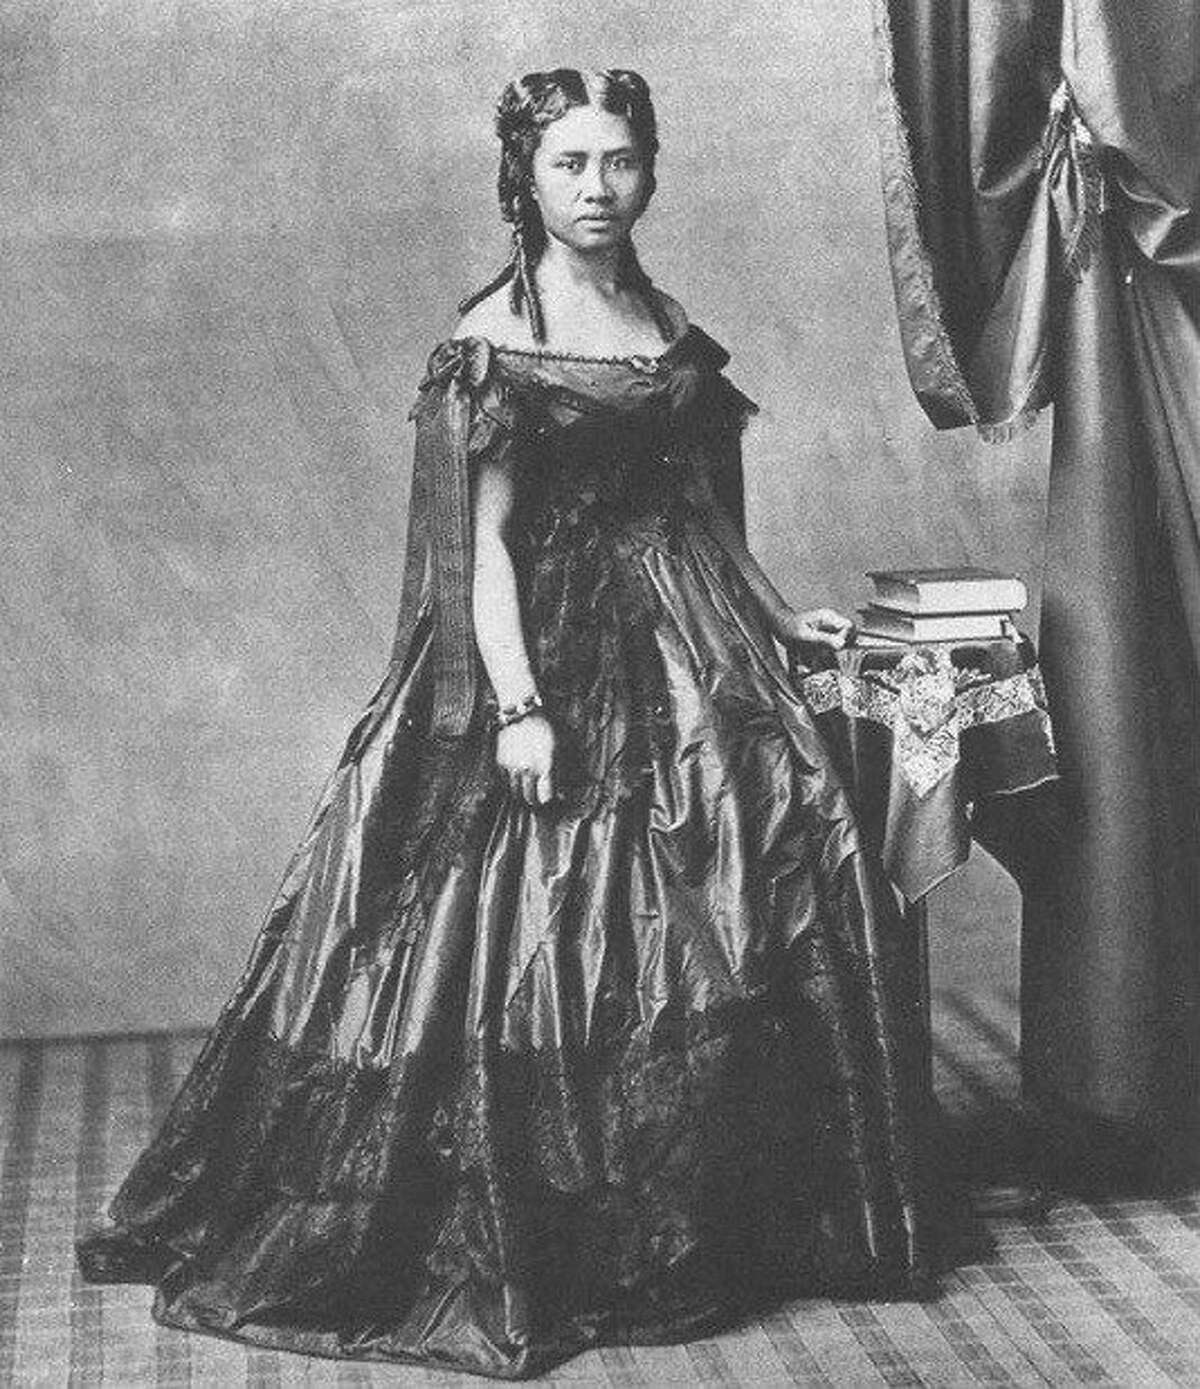 Lydia Kamakaeha, later known as Queen Lili'uokalani, in a photo from 1865 or earlier. She was educated by missionaries at a school for children of Hawaiian chiefs.